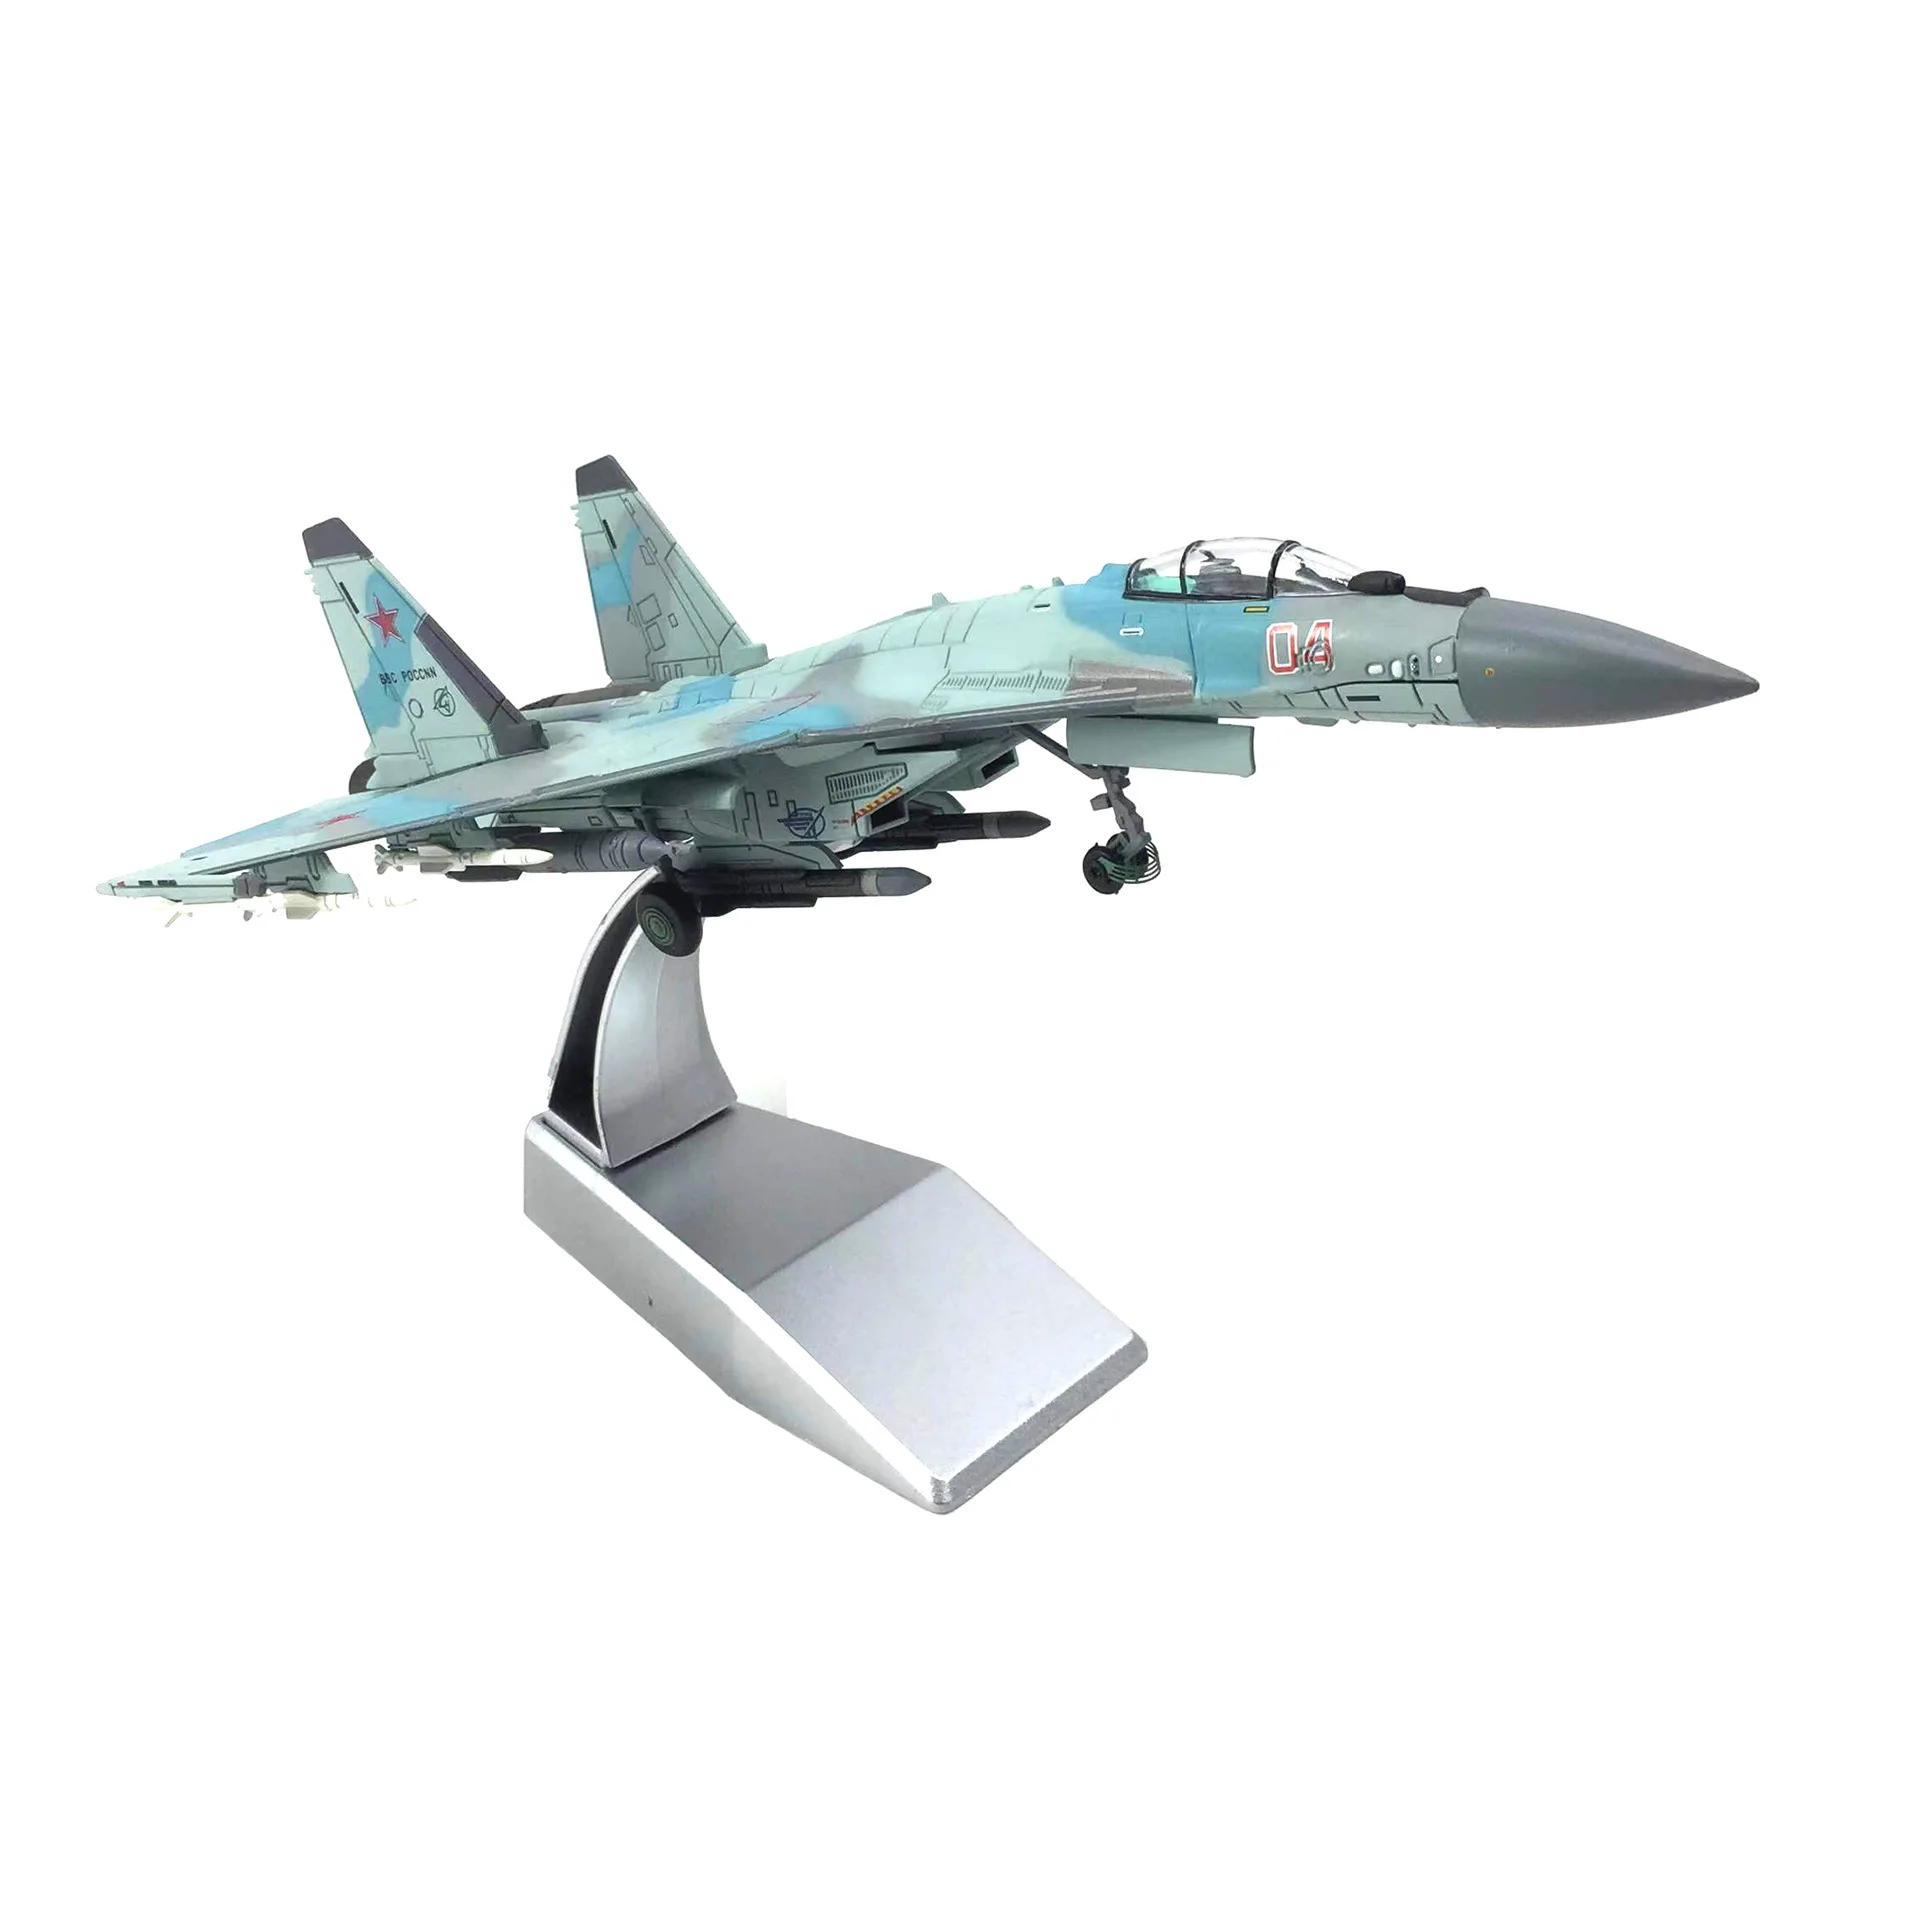 

1/100 Scale Diecast Pland Model Toys Sukhoi SU-35 Flanker-E Multi-role Fighter Die-Cast Metal Military Aircraft Toy For Boys Kid